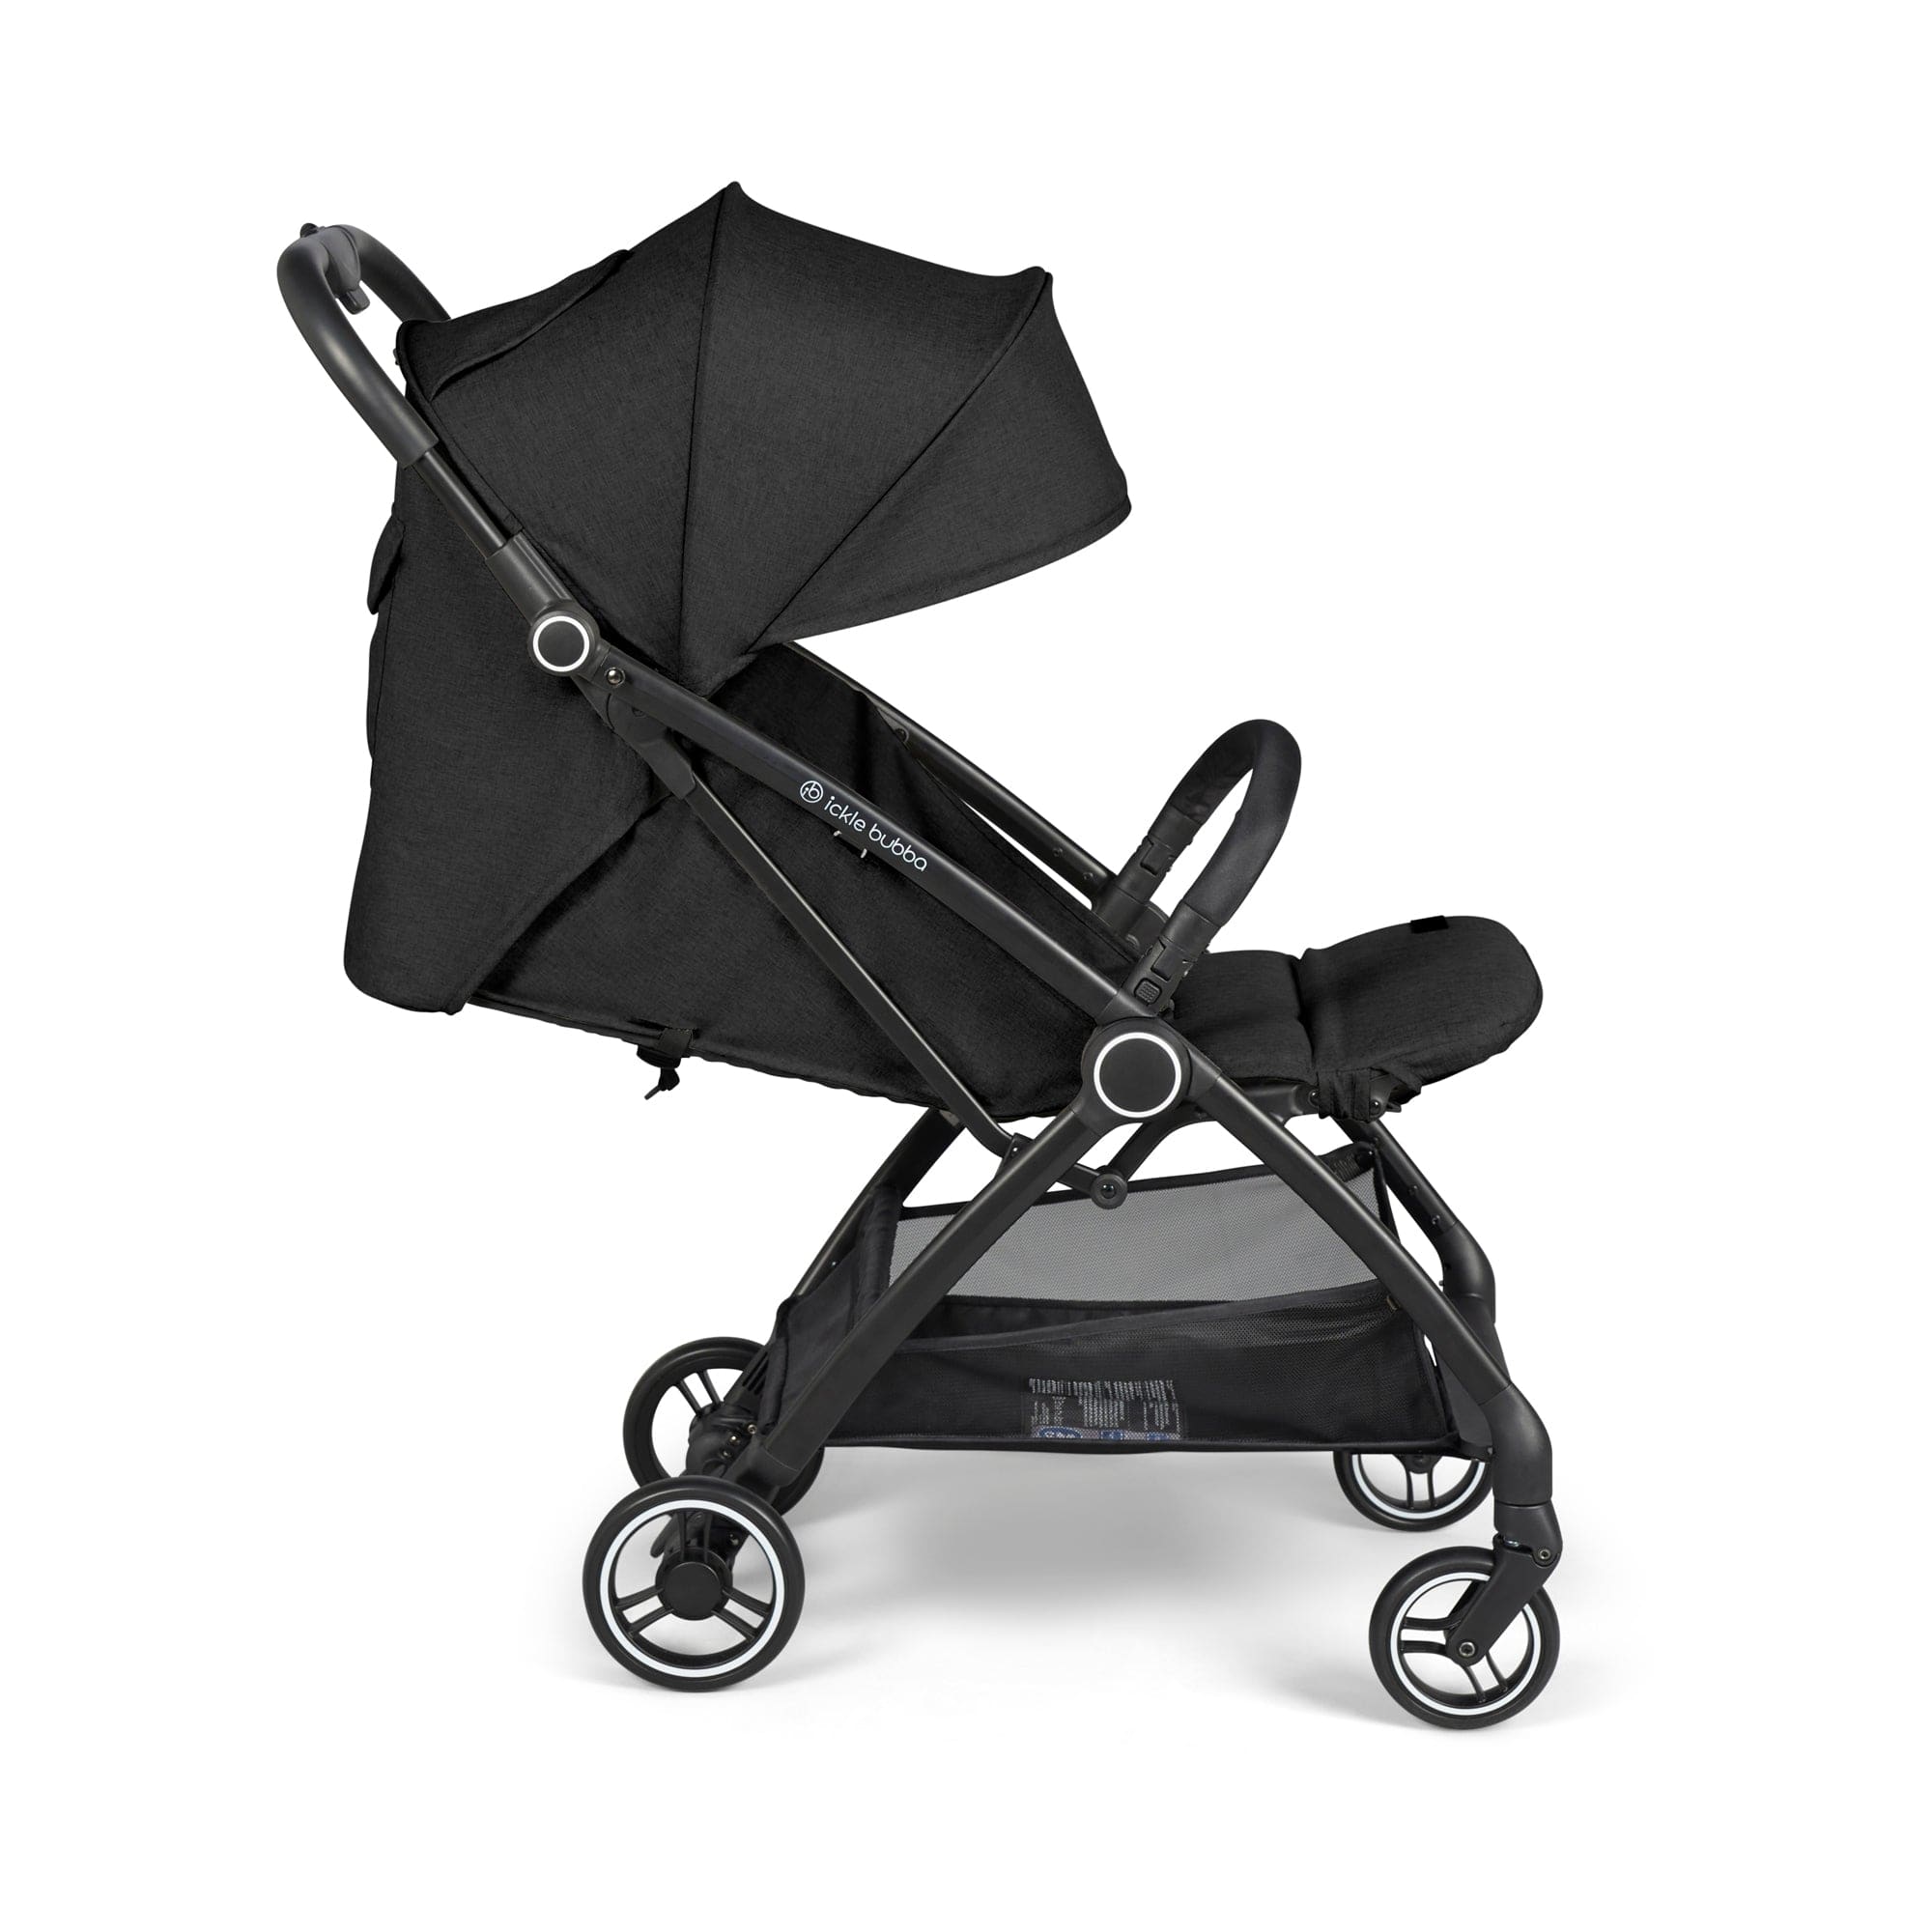 Ickle Bubba baby pushchairs Ickle Bubba Aries Prime Autofold Stroller - Black 15-005-300-001